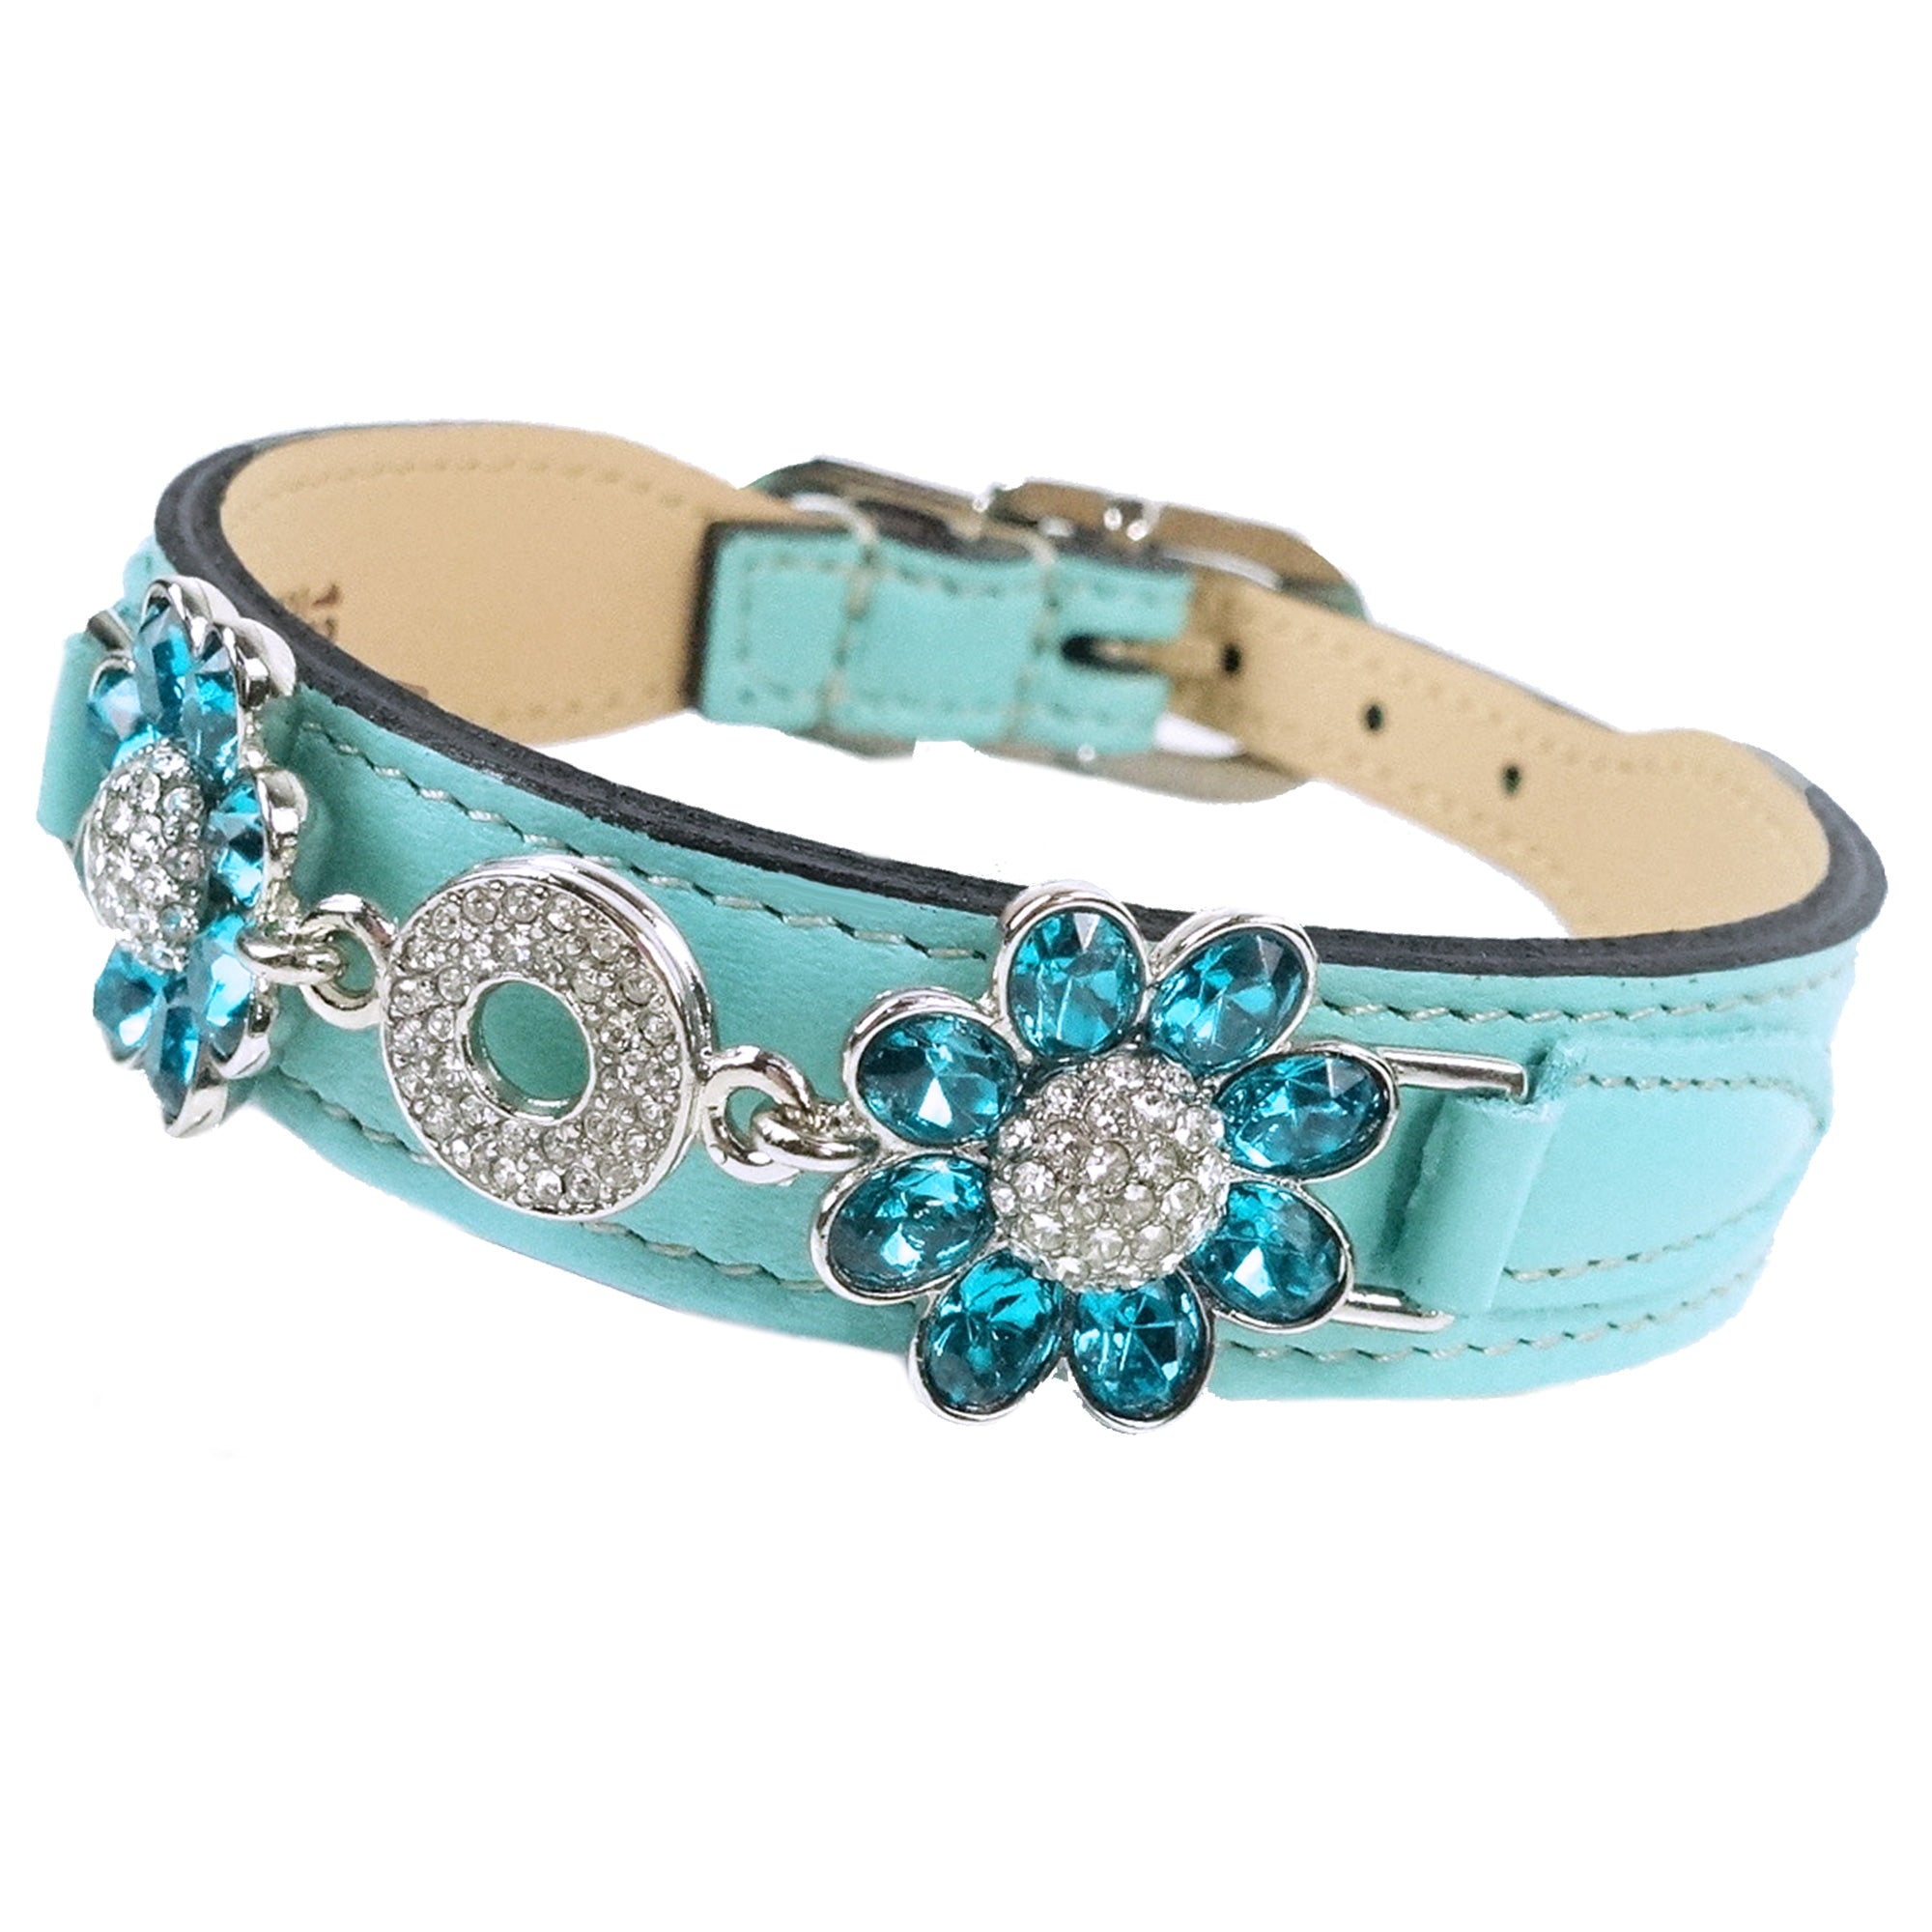 Daisy in turquoise & nickel